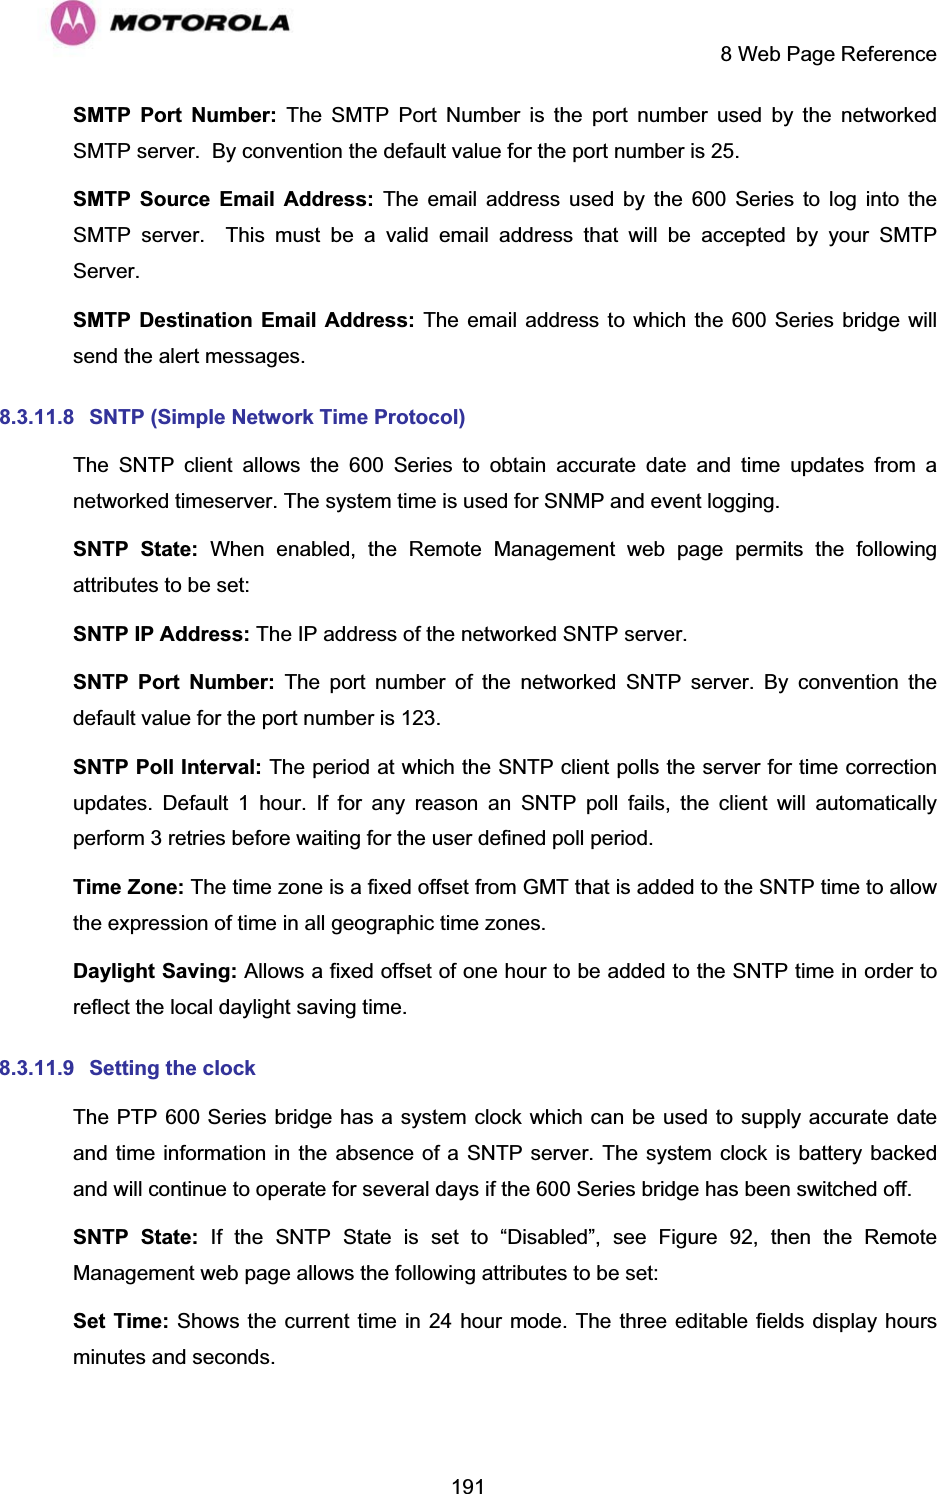     8 Web Page Reference  191SMTP Port Number: The SMTP Port Number is the port number used by the networked SMTP server.  By convention the default value for the port number is 25. SMTP Source Email Address: The email address used by the 600 Series to log into the SMTP server.  This must be a valid email address that will be accepted by your SMTP Server. SMTP Destination Email Address: The email address to which the 600 Series bridge will send the alert messages. 8.3.11.8  SNTP (Simple Network Time Protocol) The SNTP client allows the 600 Series to obtain accurate date and time updates from a networked timeserver. The system time is used for SNMP and event logging. SNTP State: When enabled, the Remote Management web page permits the following attributes to be set: SNTP IP Address: The IP address of the networked SNTP server. SNTP Port Number: The port number of the networked SNTP server. By convention the default value for the port number is 123. SNTP Poll Interval: The period at which the SNTP client polls the server for time correction updates. Default 1 hour. If for any reason an SNTP poll fails, the client will automatically perform 3 retries before waiting for the user defined poll period. Time Zone: The time zone is a fixed offset from GMT that is added to the SNTP time to allow the expression of time in all geographic time zones. Daylight Saving: Allows a fixed offset of one hour to be added to the SNTP time in order to reflect the local daylight saving time. 8.3.11.9  Setting the clock  The PTP 600 Series bridge has a system clock which can be used to supply accurate date and time information in the absence of a SNTP server. The system clock is battery backed and will continue to operate for several days if the 600 Series bridge has been switched off. SNTP State: If the SNTP State is set to “Disabled”, see Figure 92, then the Remote Management web page allows the following attributes to be set: Set Time: Shows the current time in 24 hour mode. The three editable fields display hours minutes and seconds. 